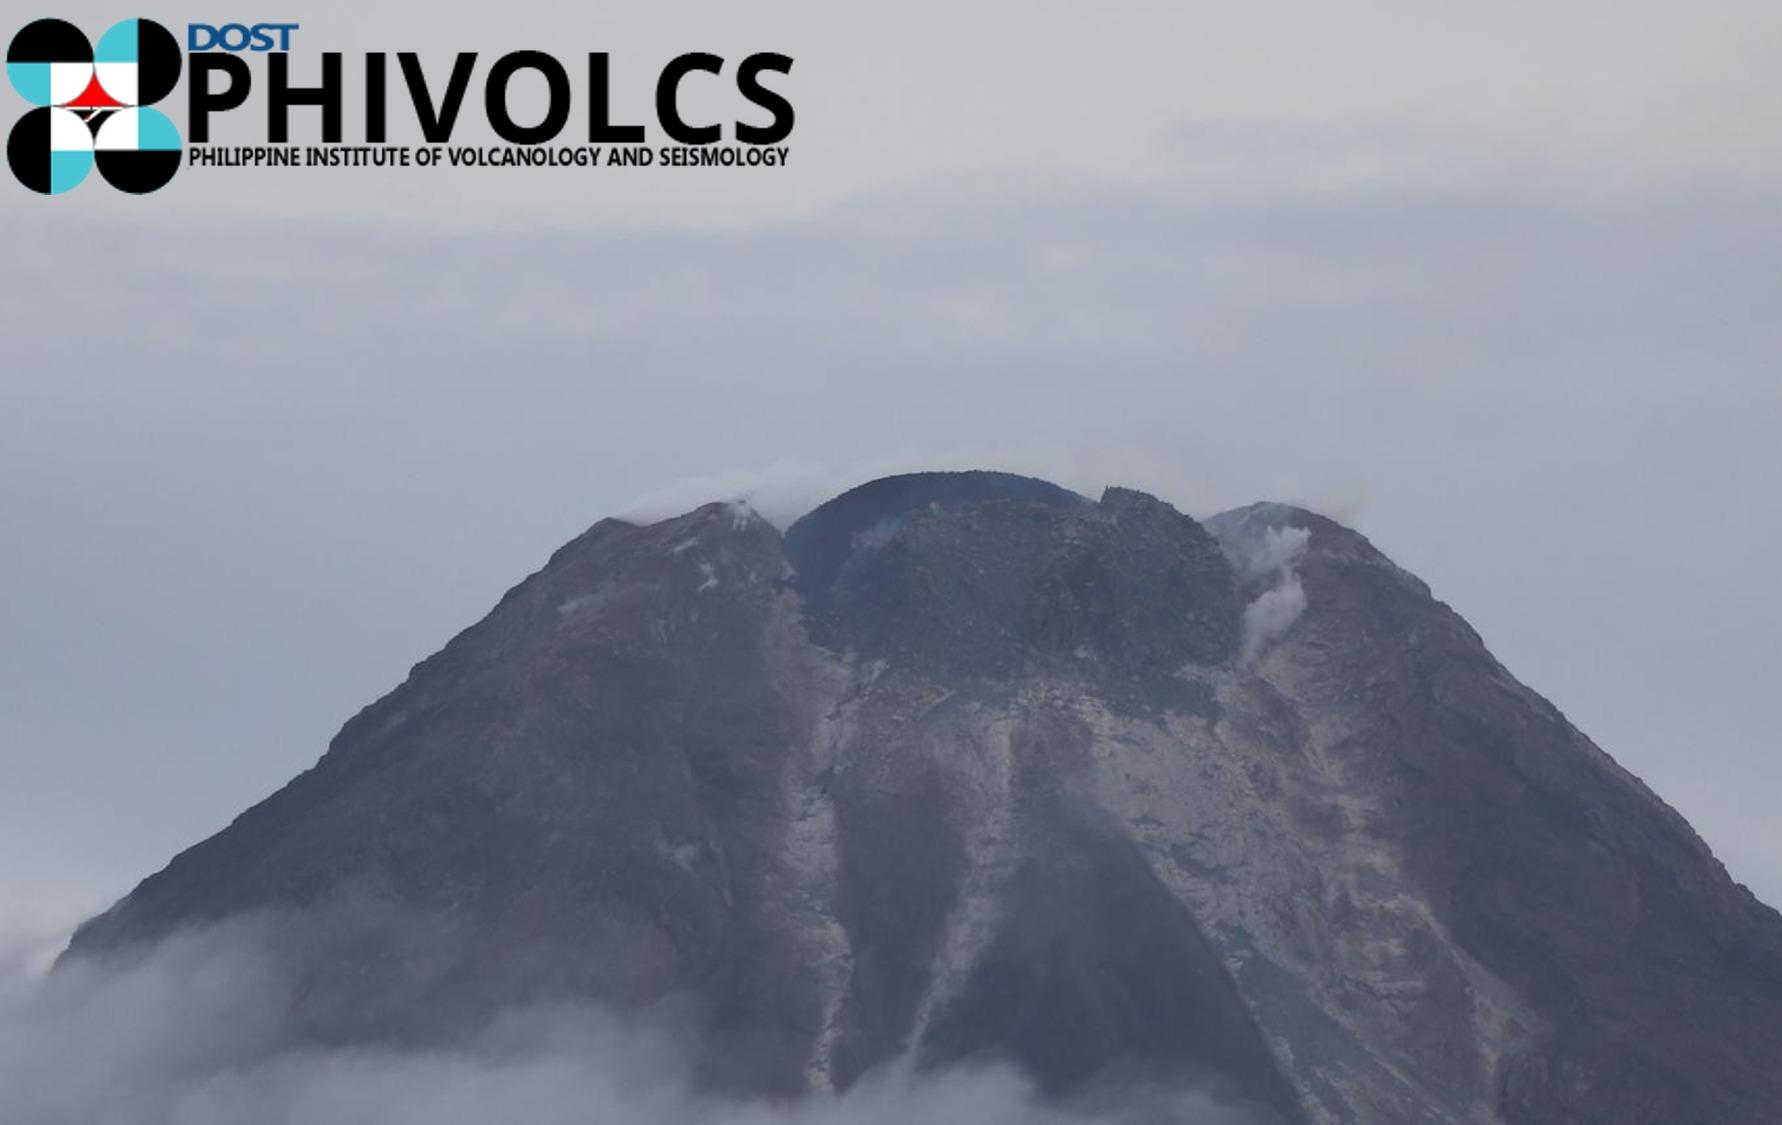 New summit lava dome seen in Mayon Volcano